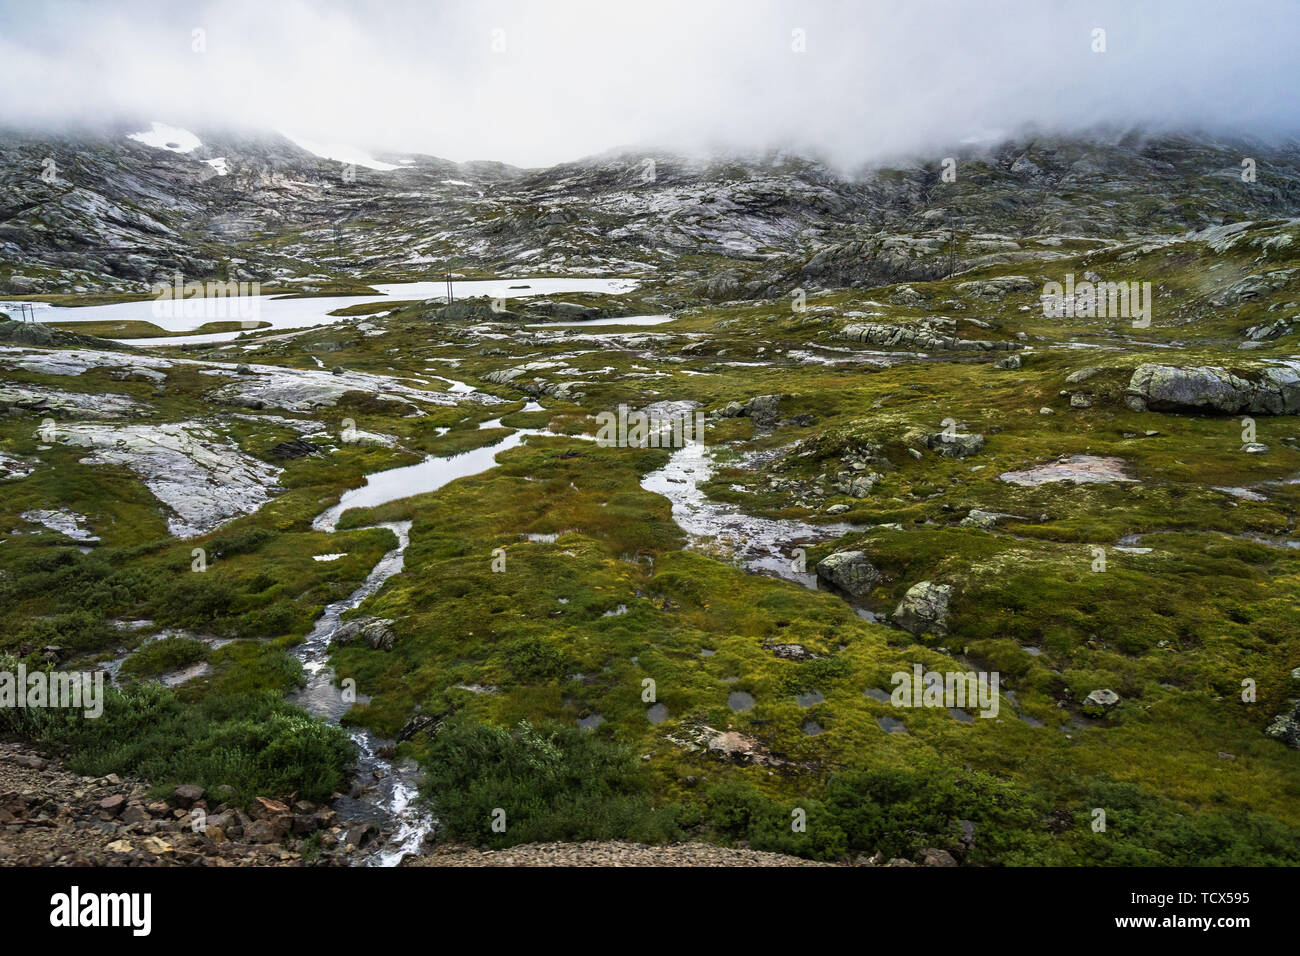 Scenic mountain landscape in a remote area of Hardangervidda National Park, located in central southern Norway. Photo taken from Oslo-Bergen train Stock Photo